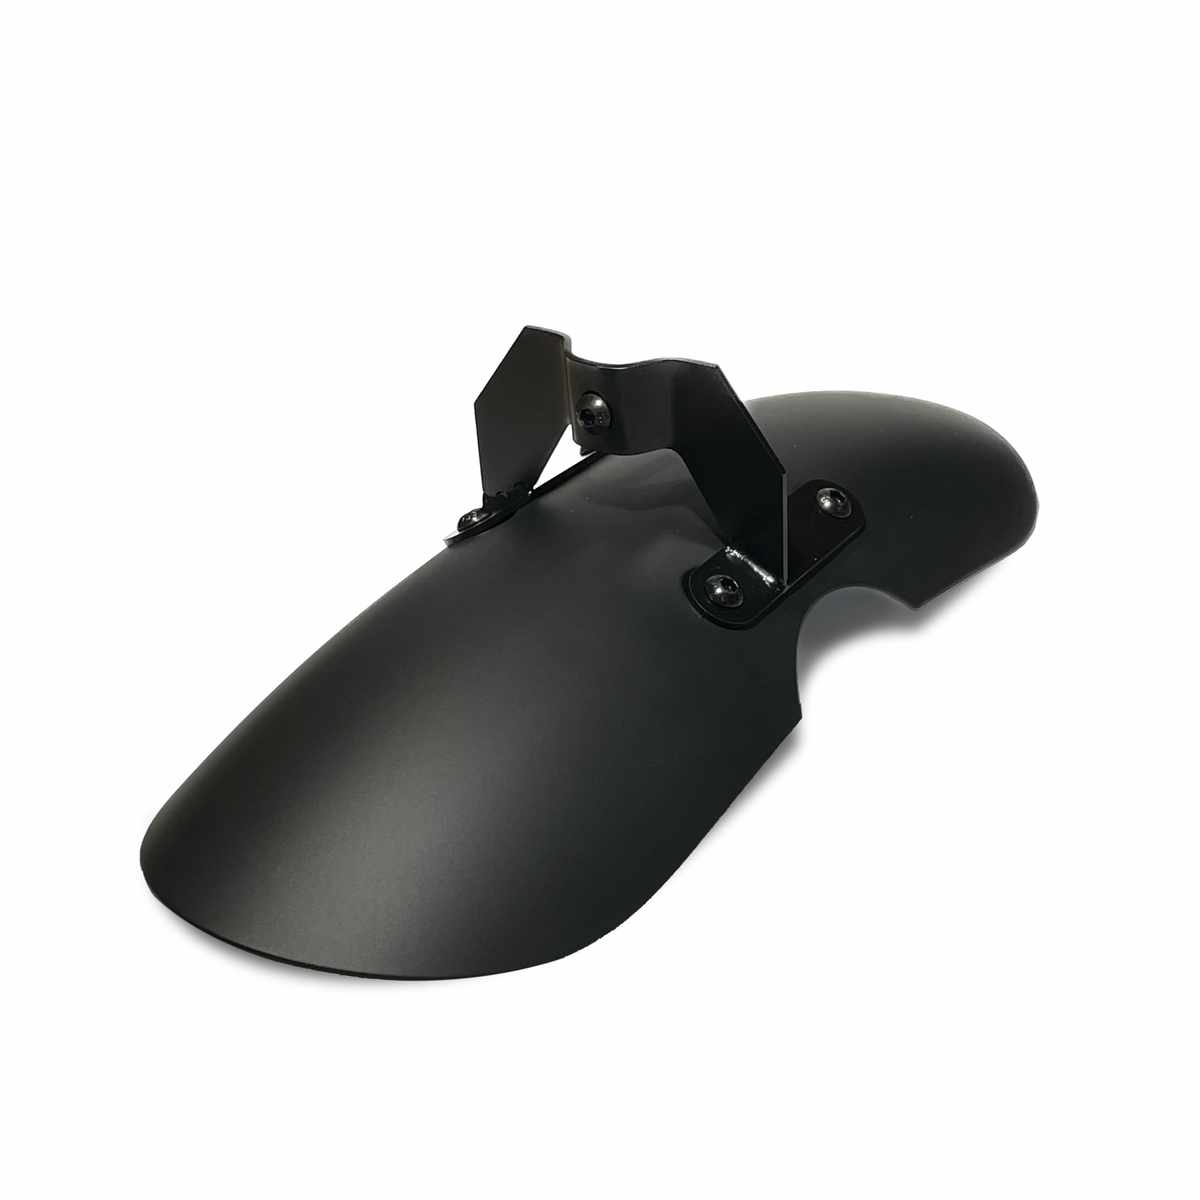 S2/Miami SE Airfork Mudguard Fender - Forty Customs